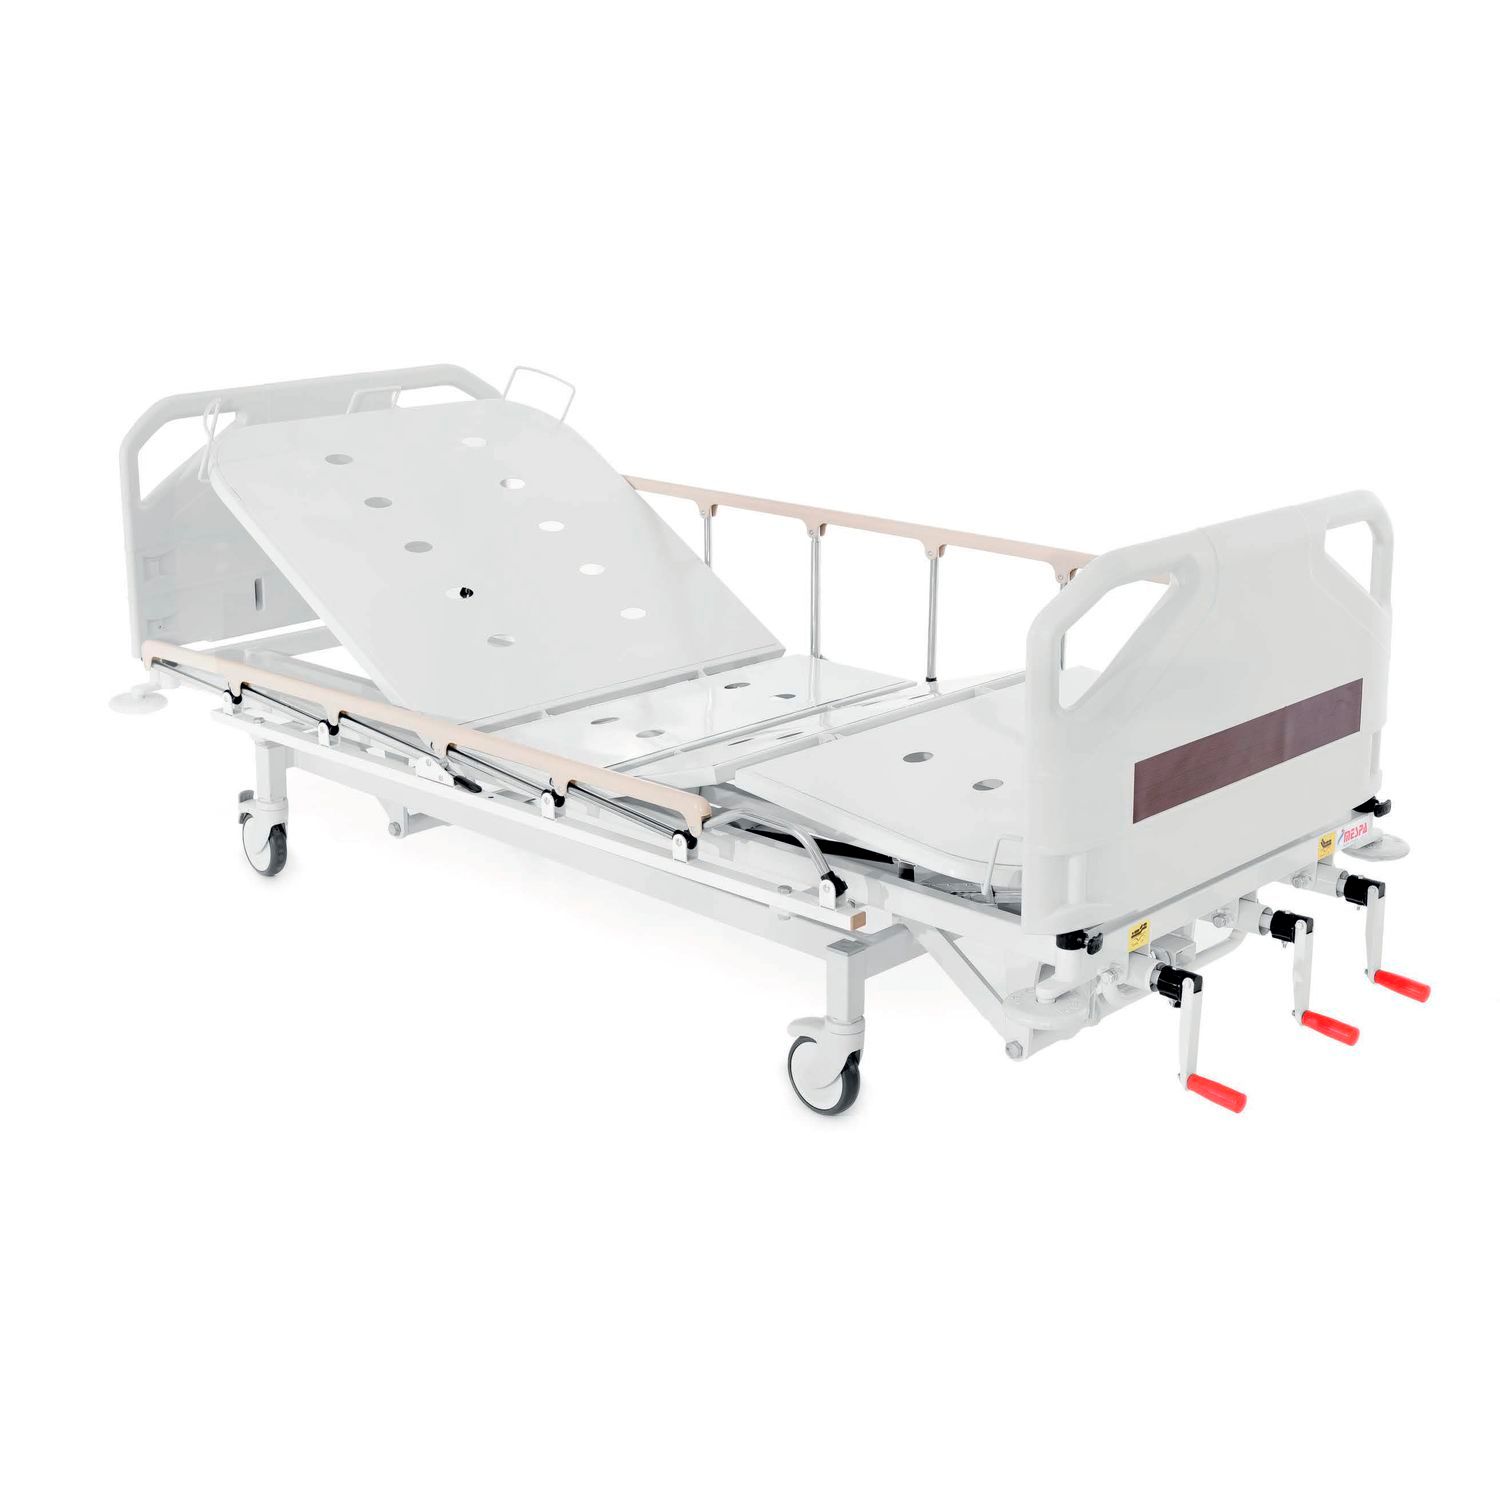 3 Function Manual ICU Bed